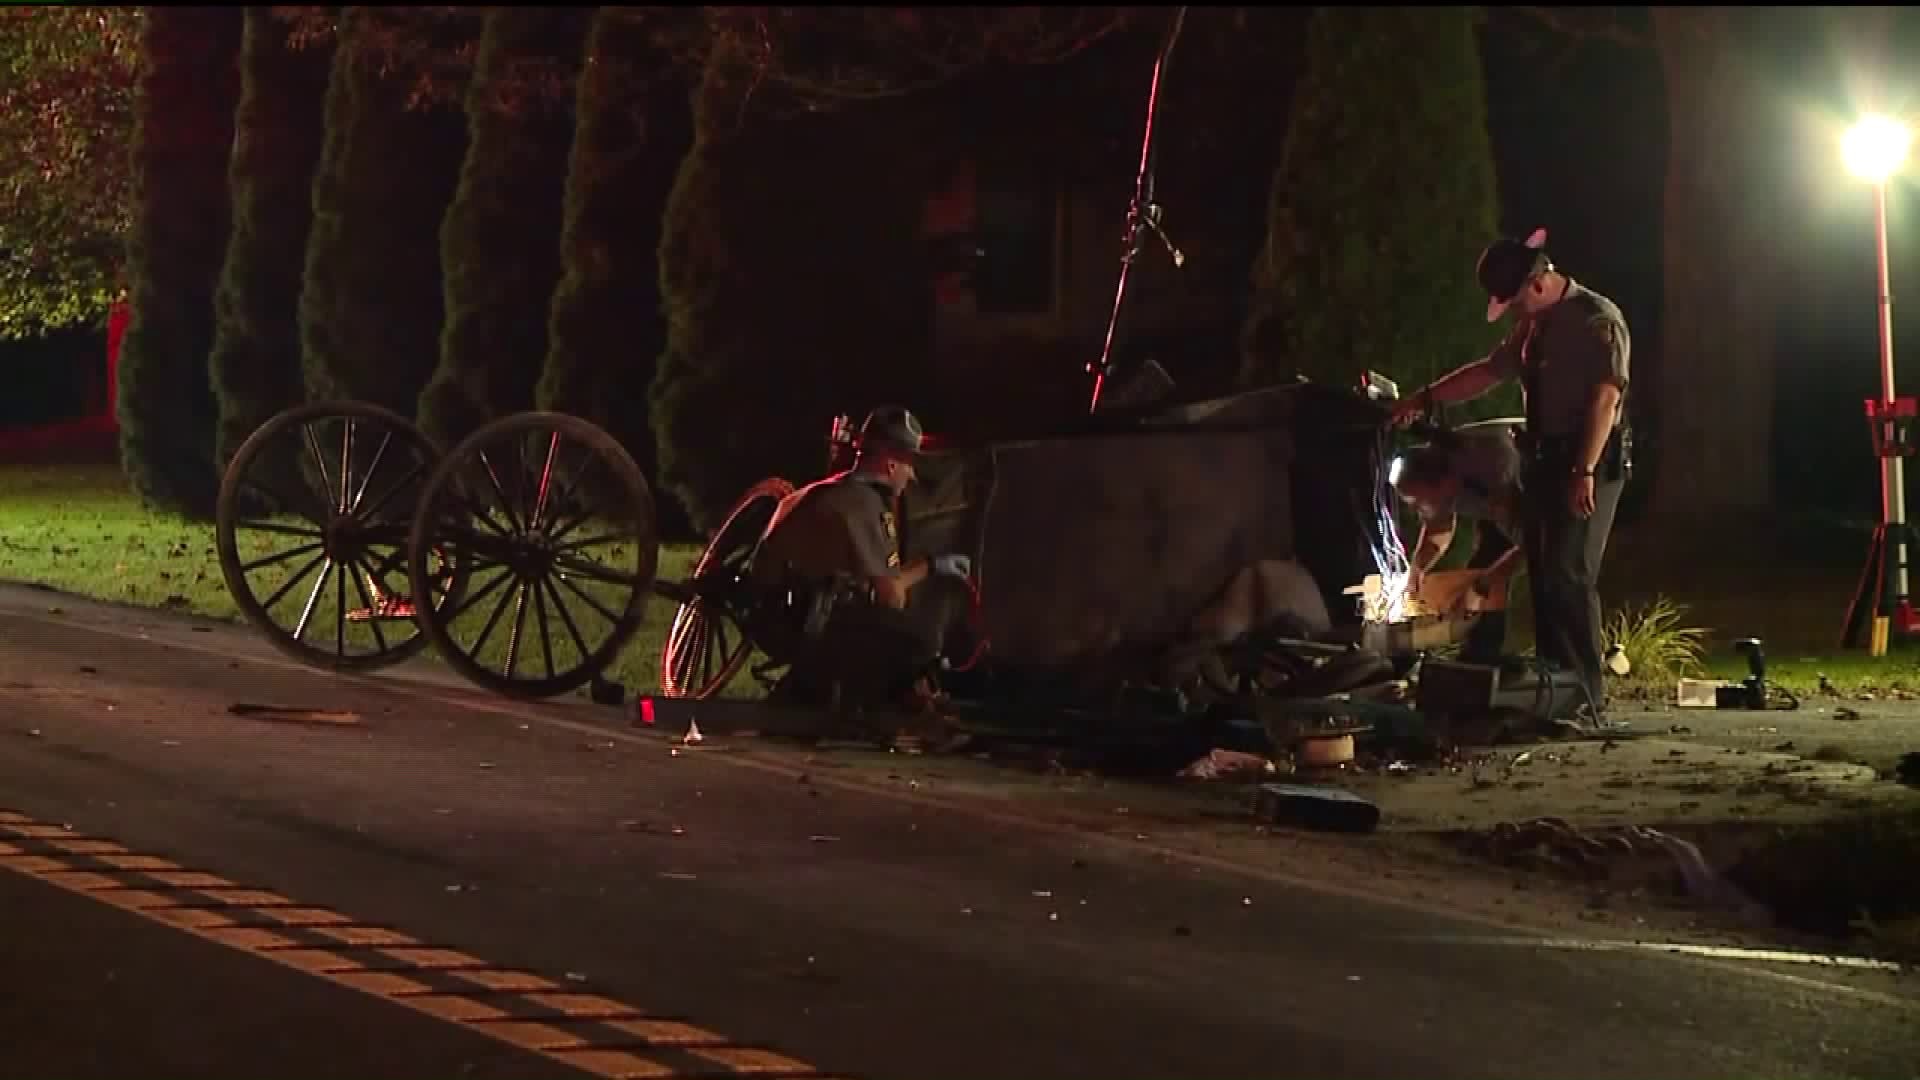 UPDATE: Arrest Made in Horse and Buggy Crash in Lycoming County